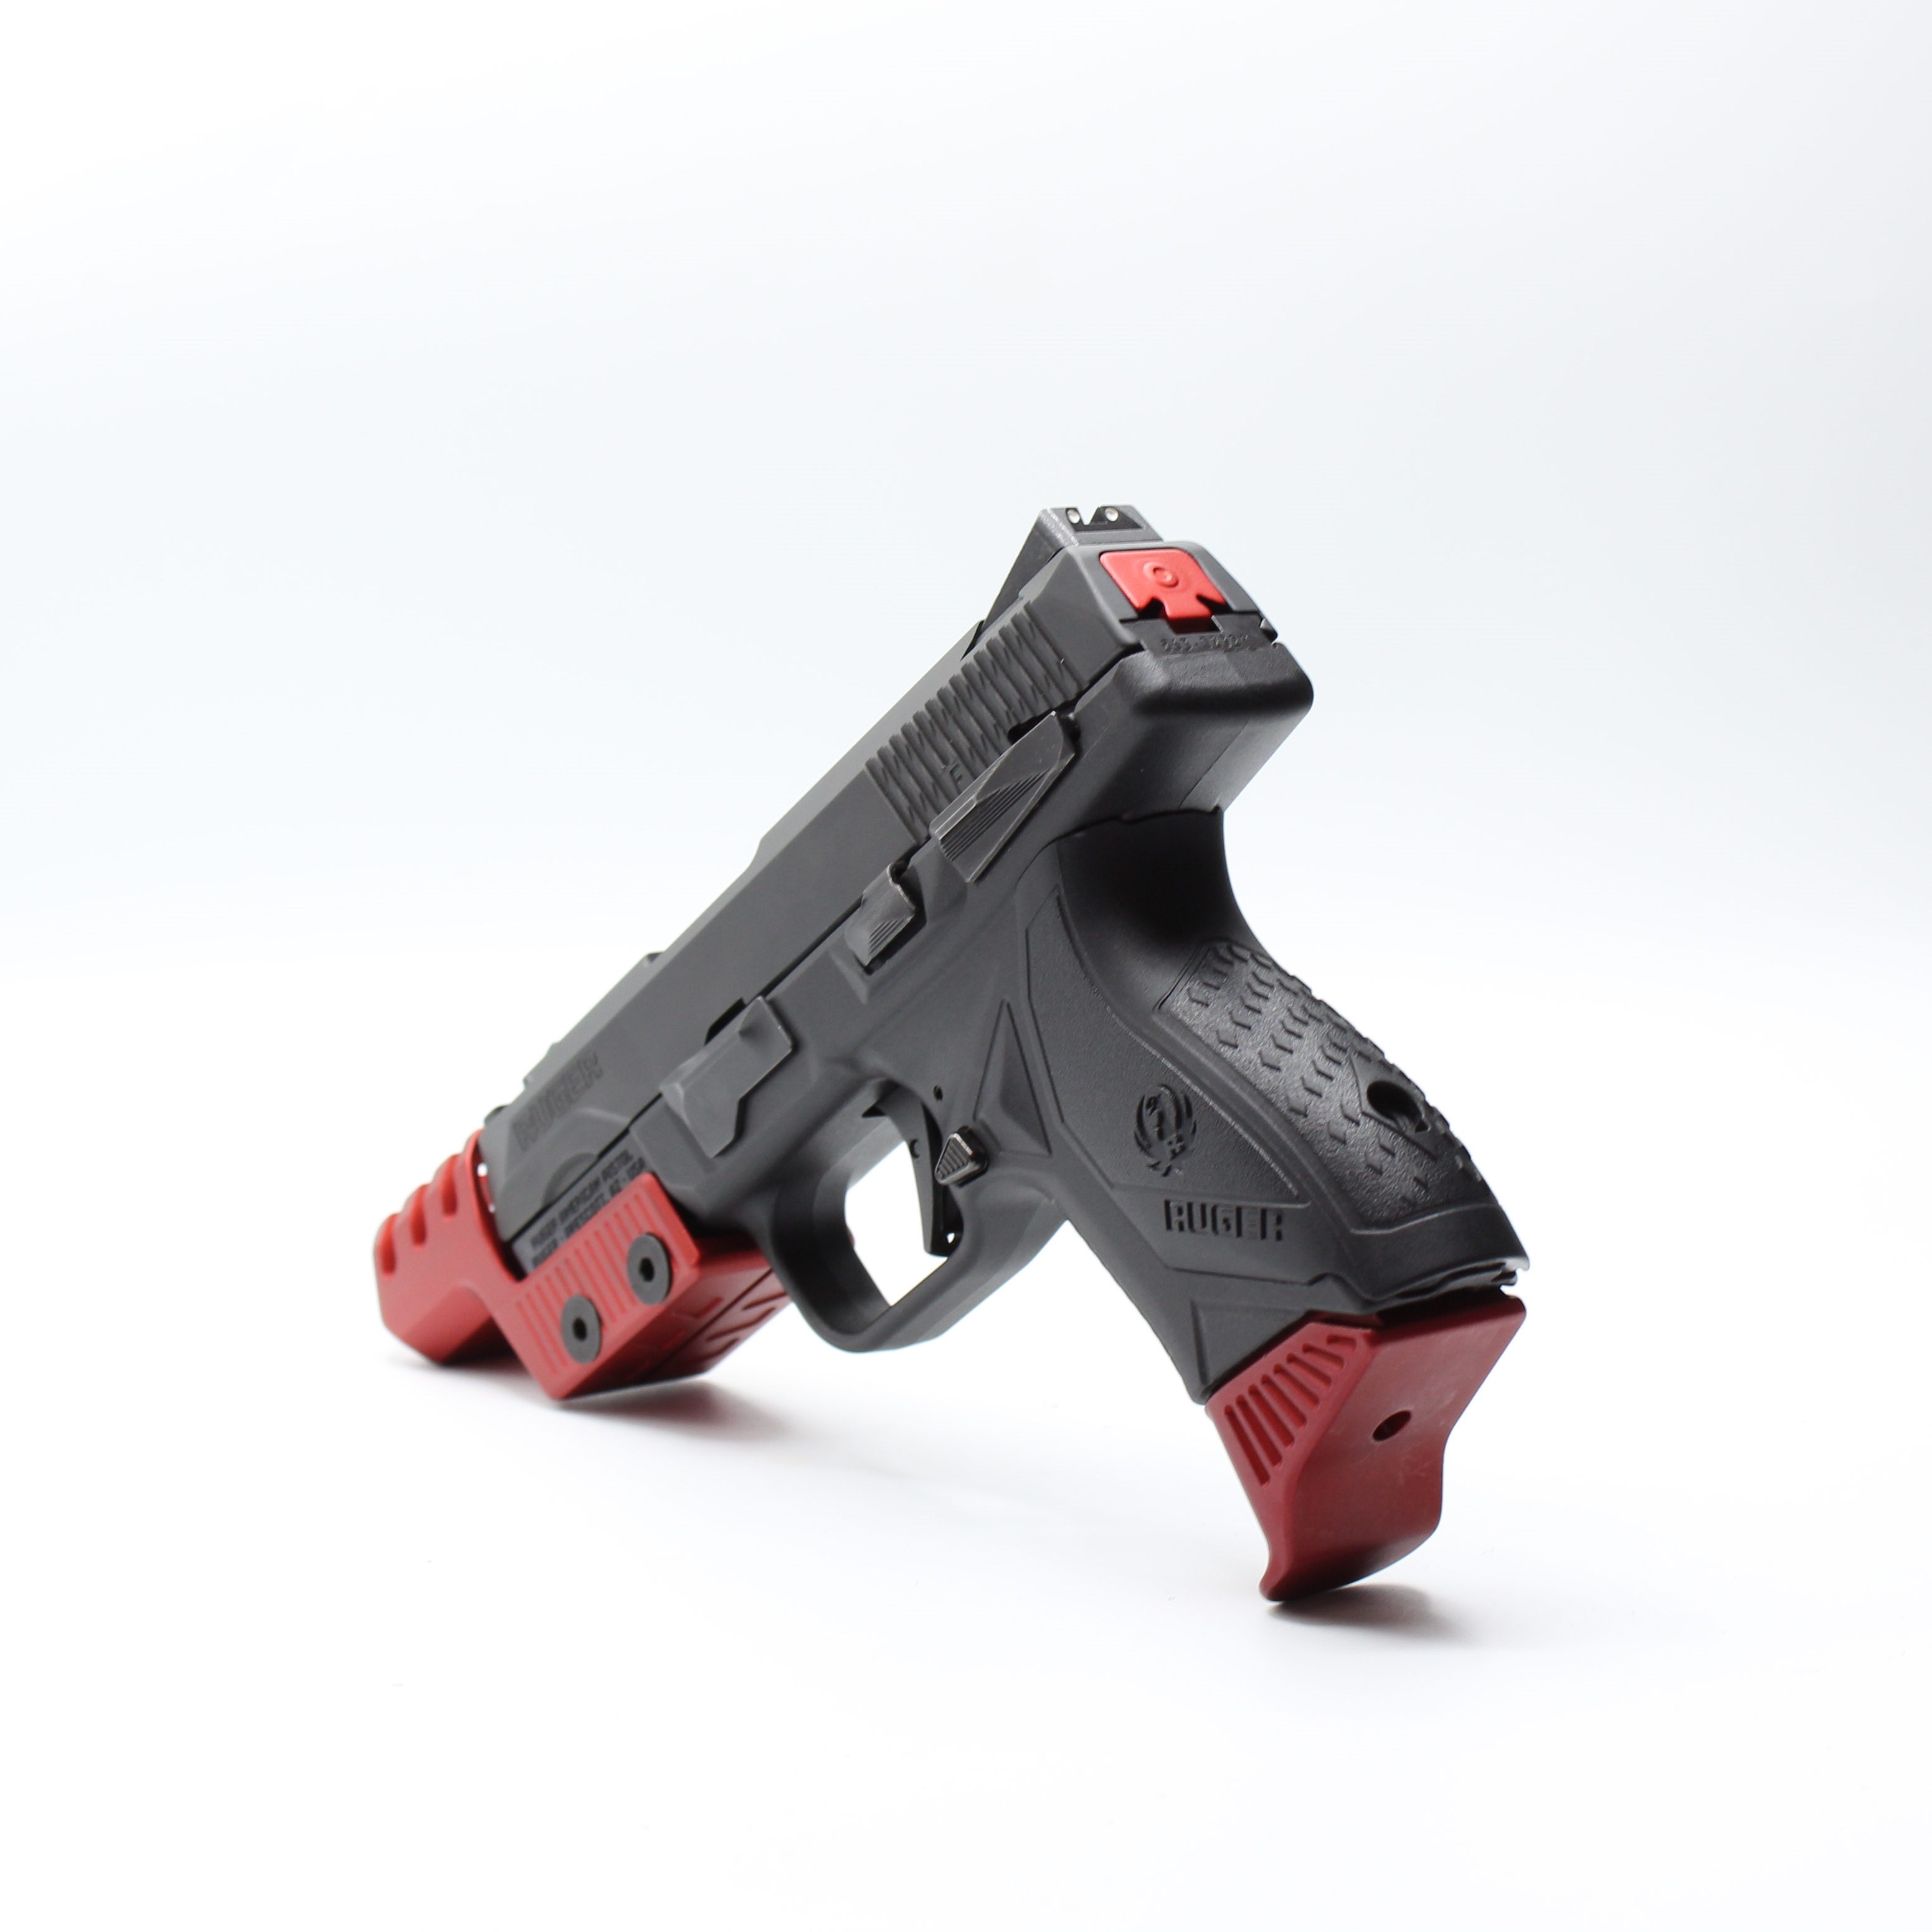 Ruger American Compact 9mm Upgrade Kit Questions & Answers